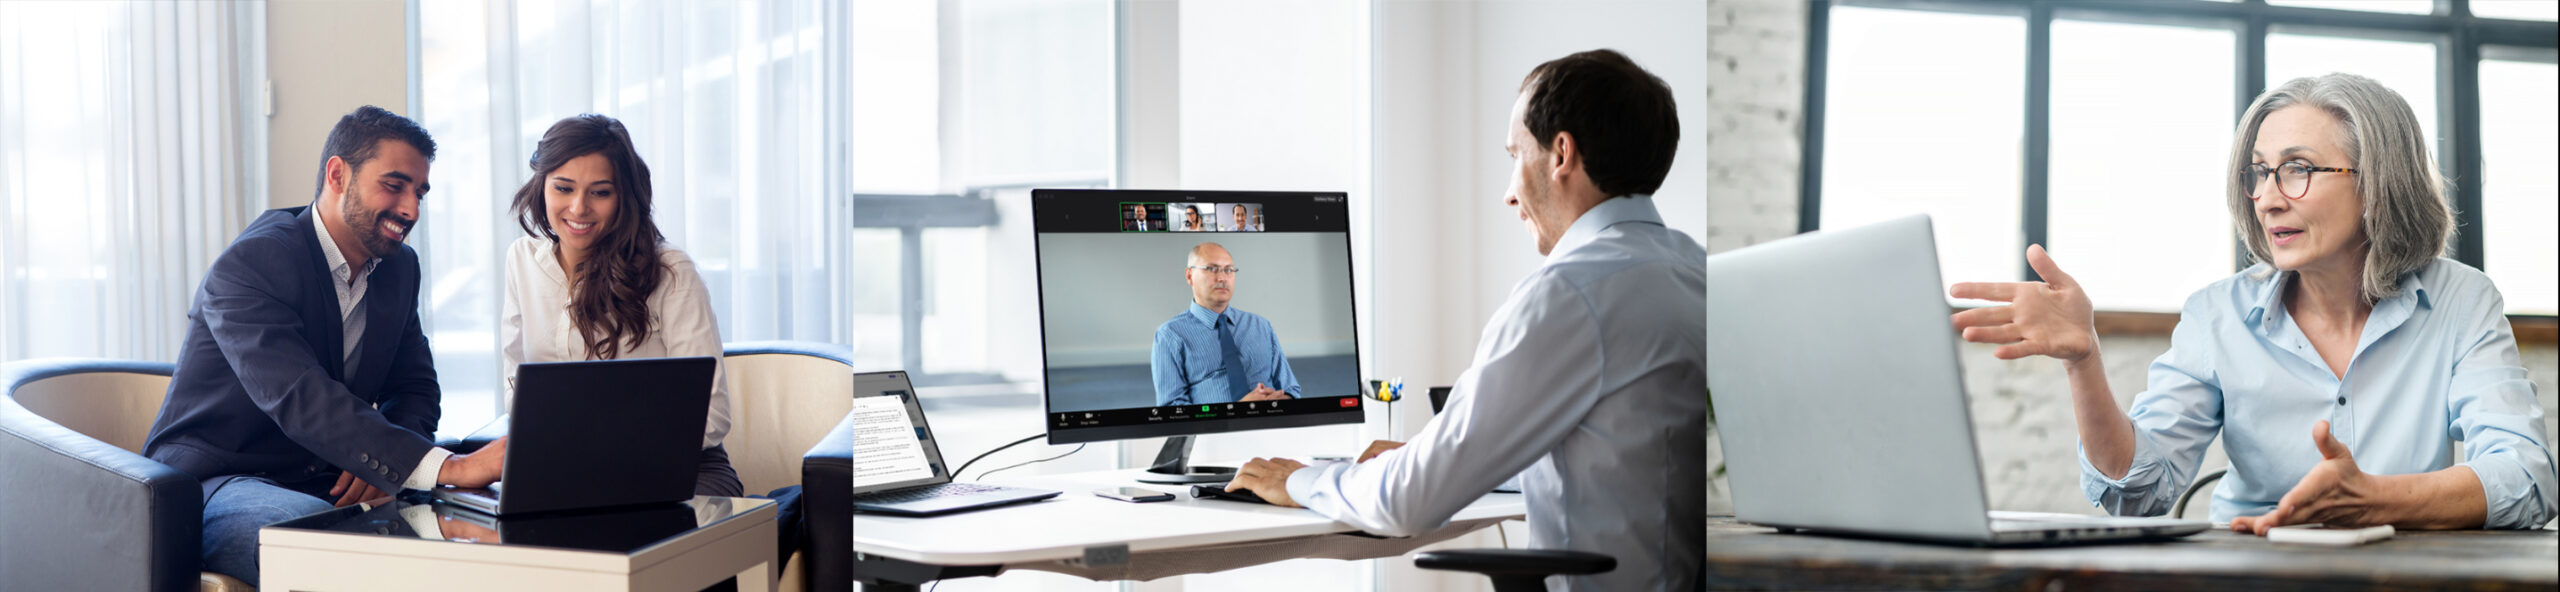 3 images are arranged into a banner. The first image on the left shows two people in business outfits looking at a laptop. The middle image shows a man on a video conference call sitting at a desk. The third image shows a woman looking at and gesturing towards a laptop.